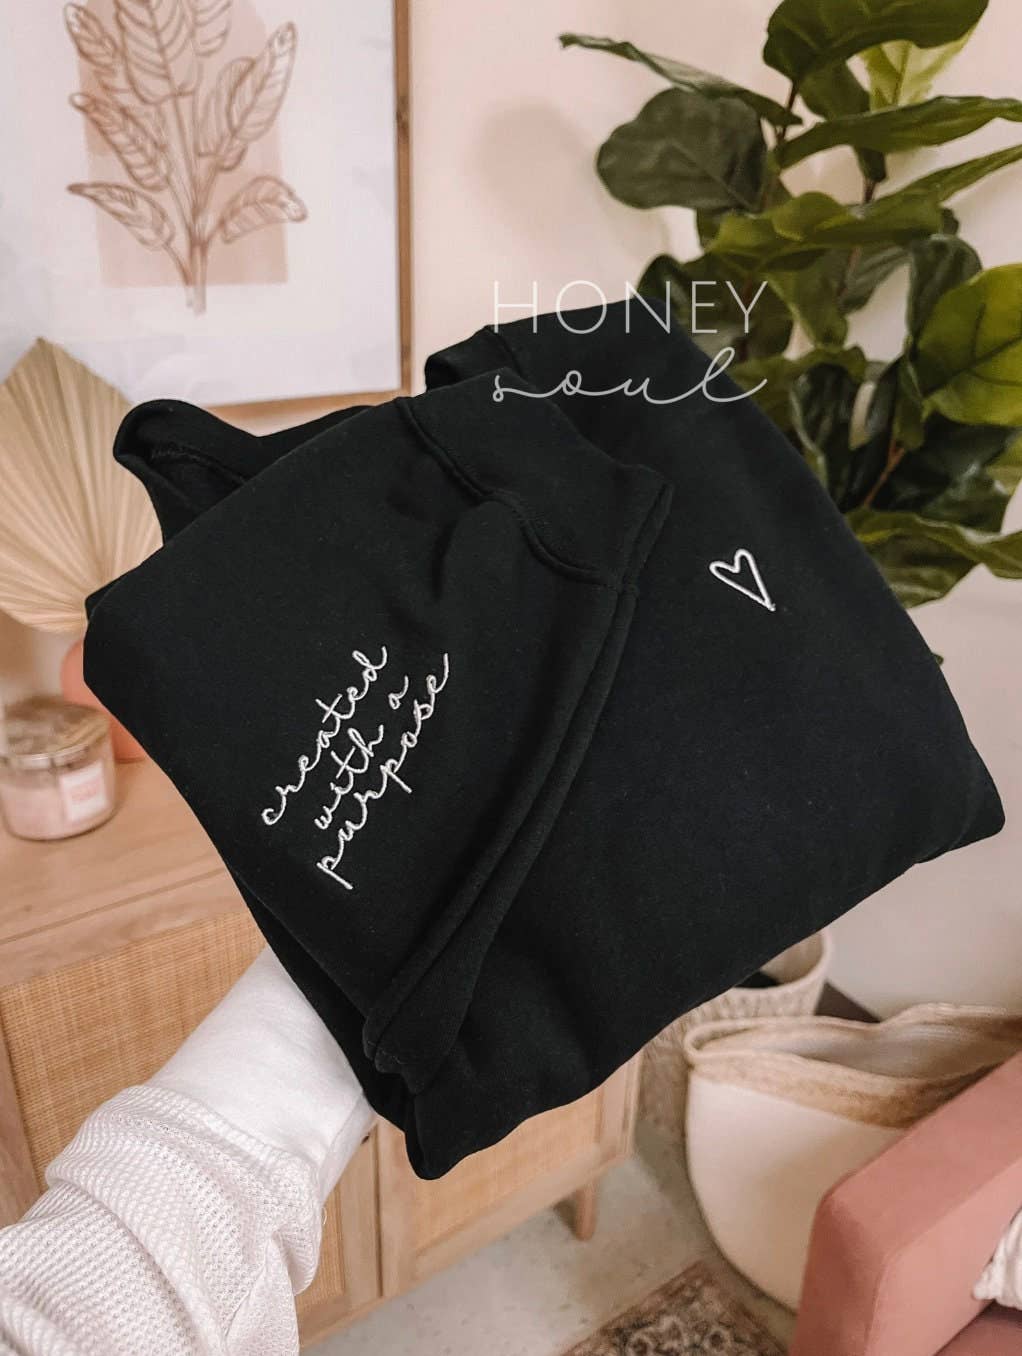 Honey Soul LLC - Created With A Purpose Embroidered Sweatshirt